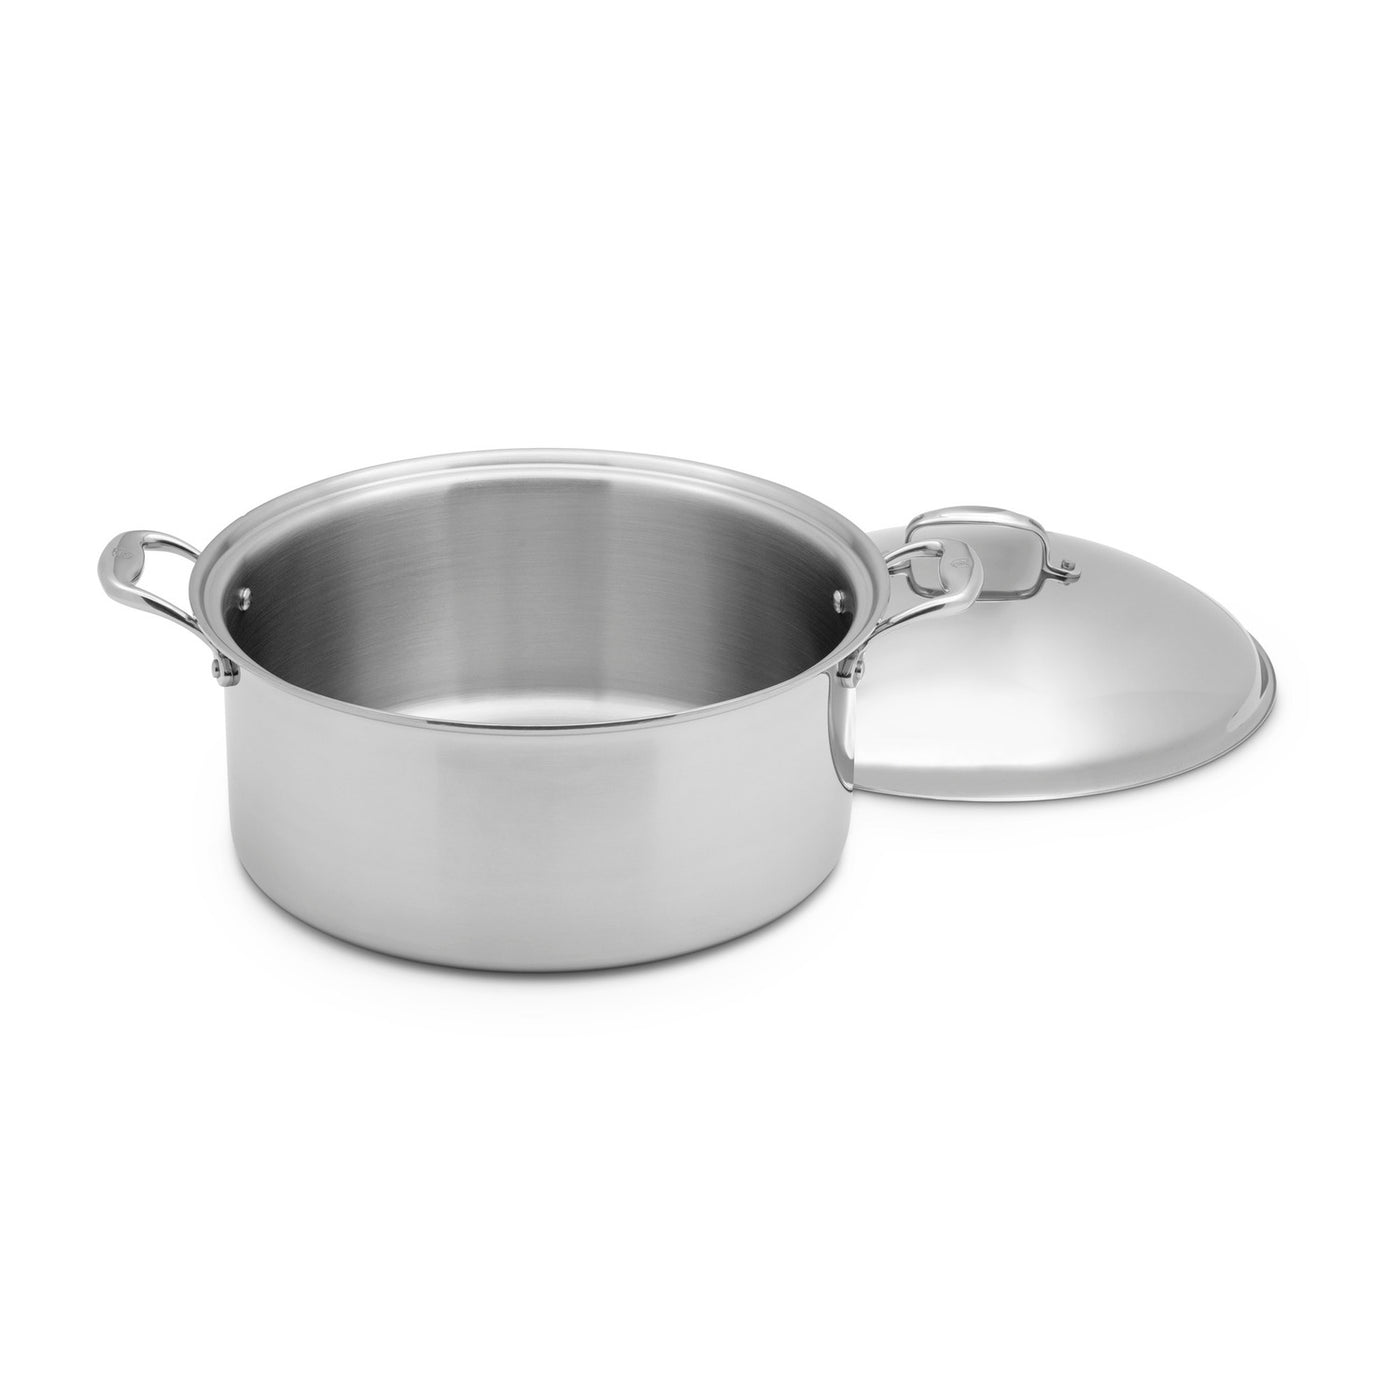 Wholesale YUTAI 304 Stainless Steel Hammered stock Pot with Lid